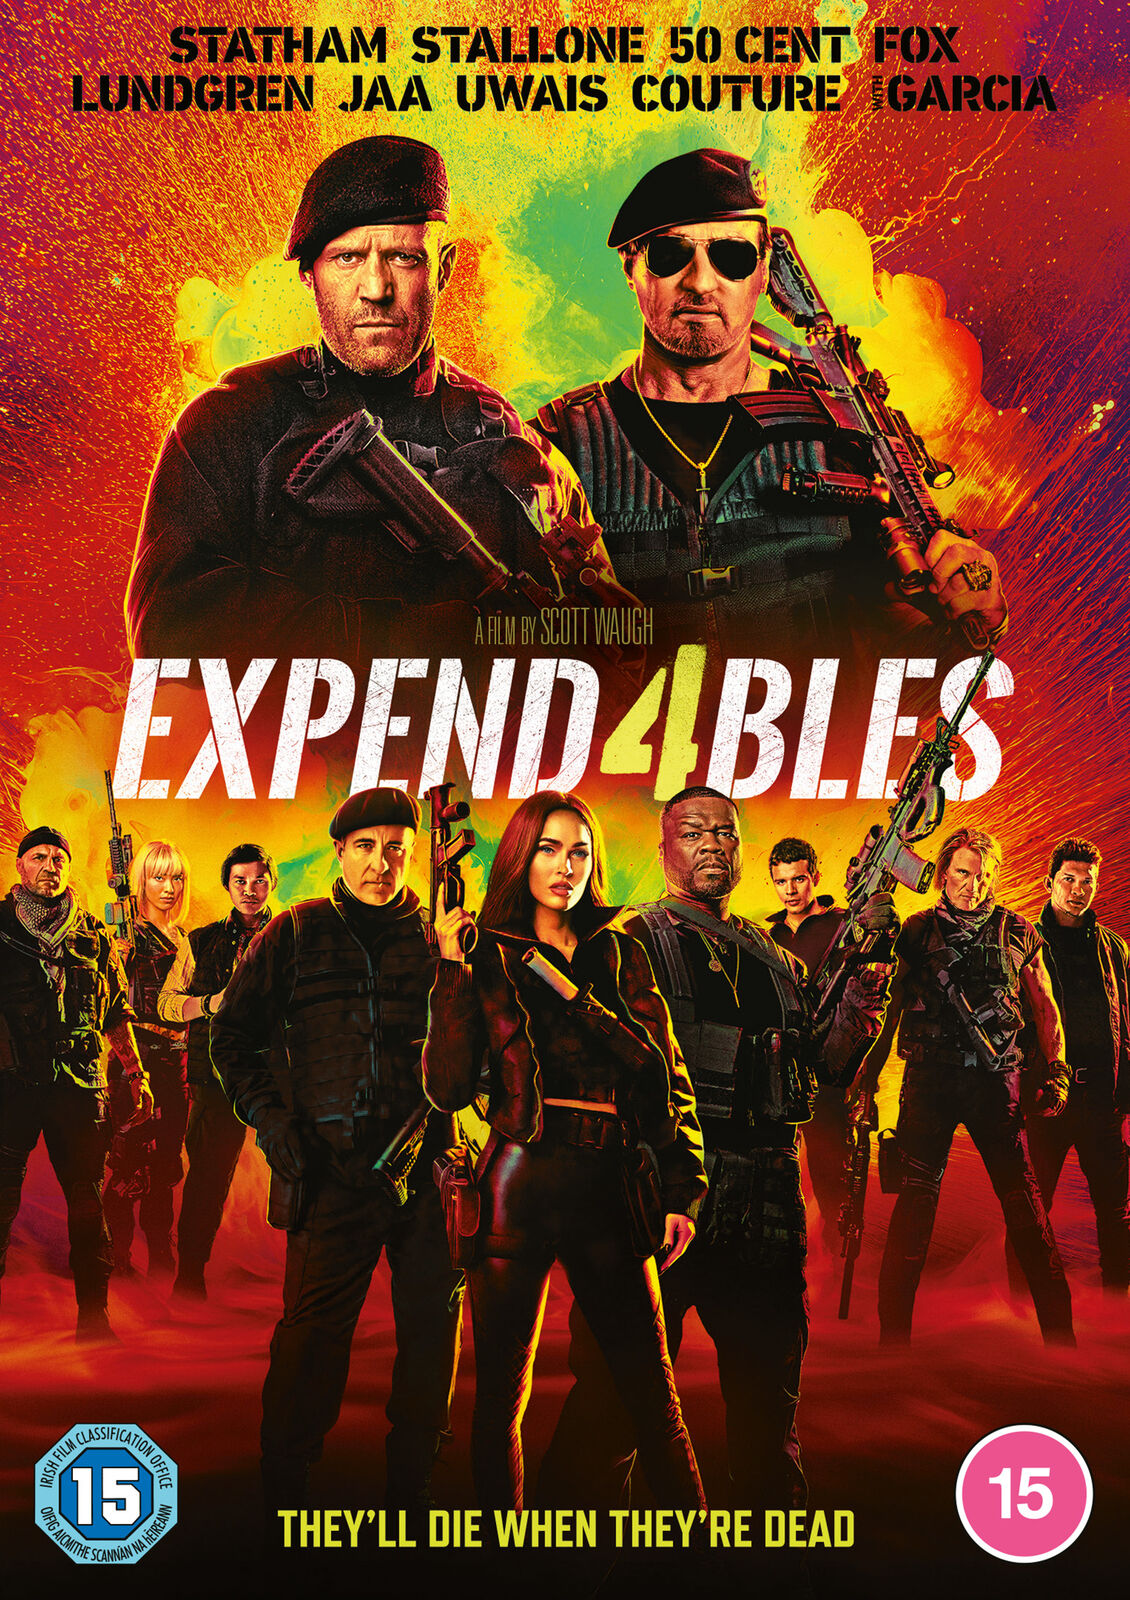 Expend4bles (Expendables 4) (DVD) Randy Couture Tony Jaa Iko Uwais (UK IMPORT)